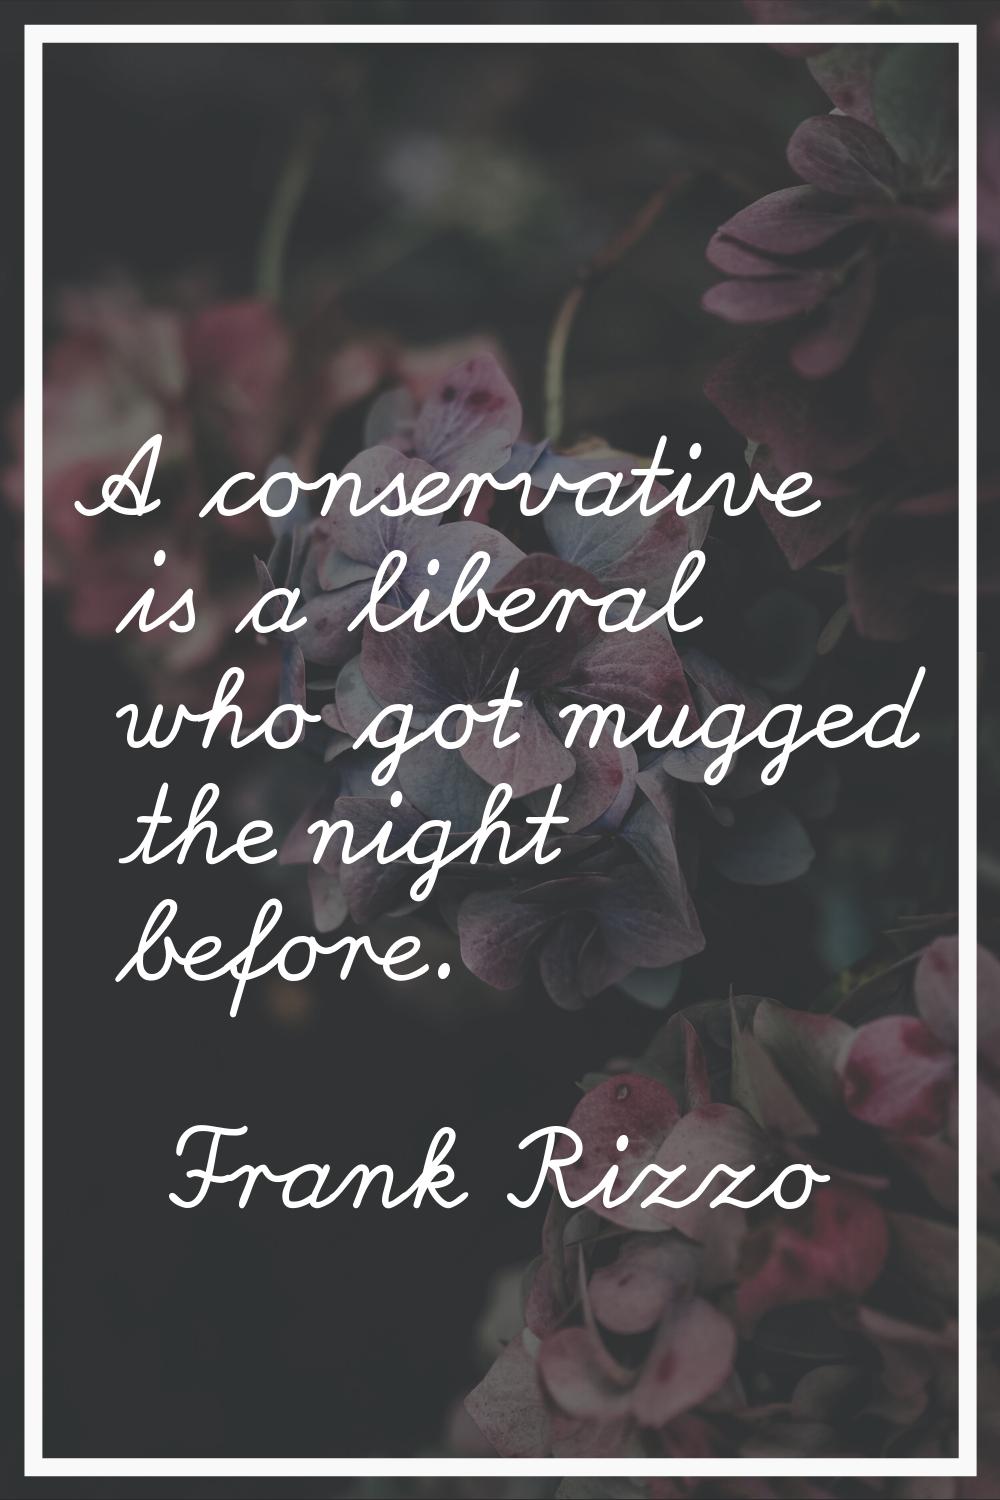 A conservative is a liberal who got mugged the night before.